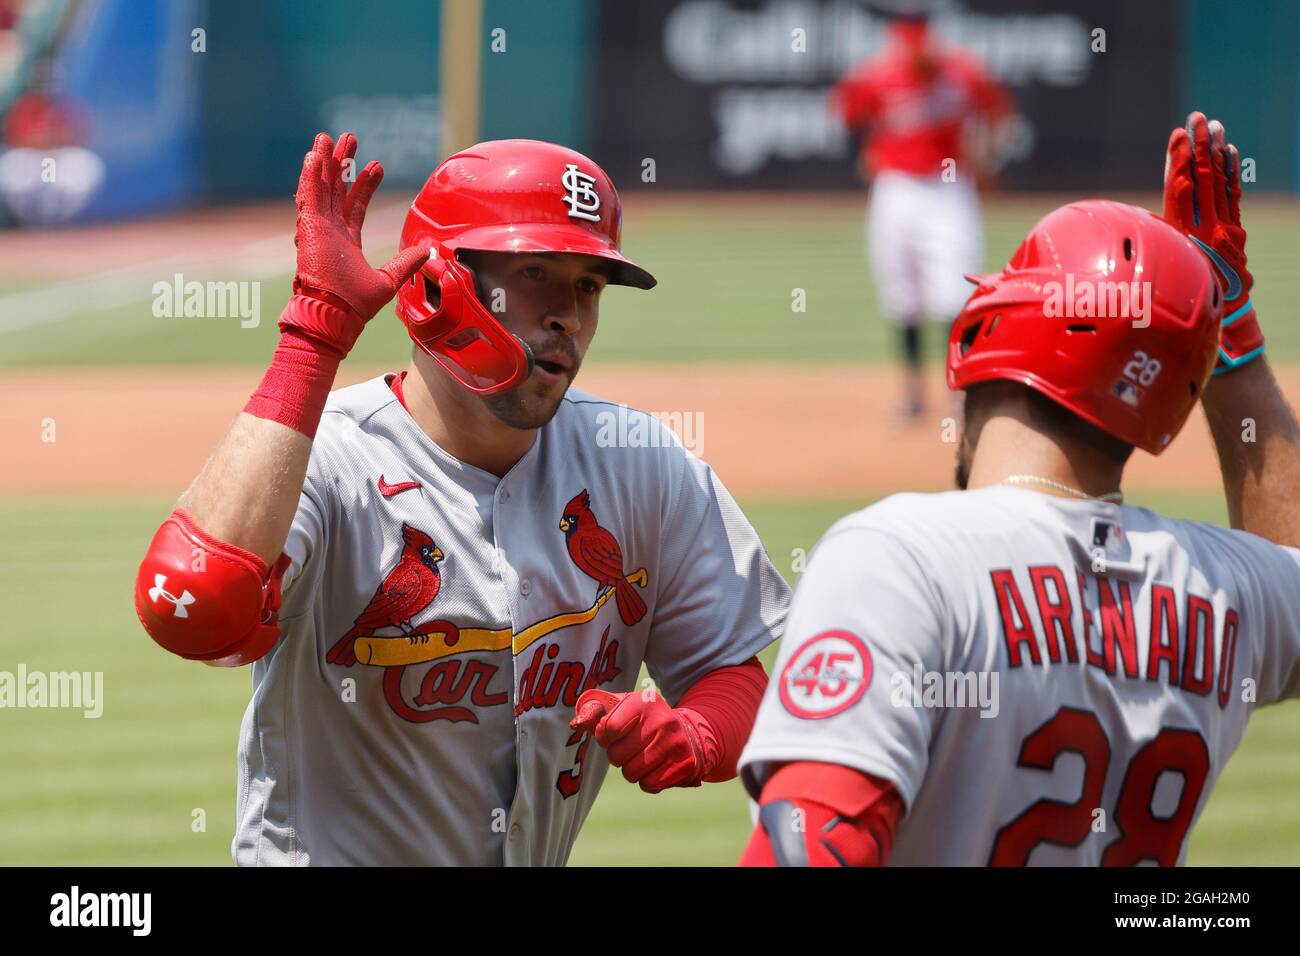 CLEVELAND, OH - JULY 28: Dylan Carlson (3) of the St. Louis Cardinals celebrates with Nolan Arenado (28) after hitting a home run during a game agains Stock Photo